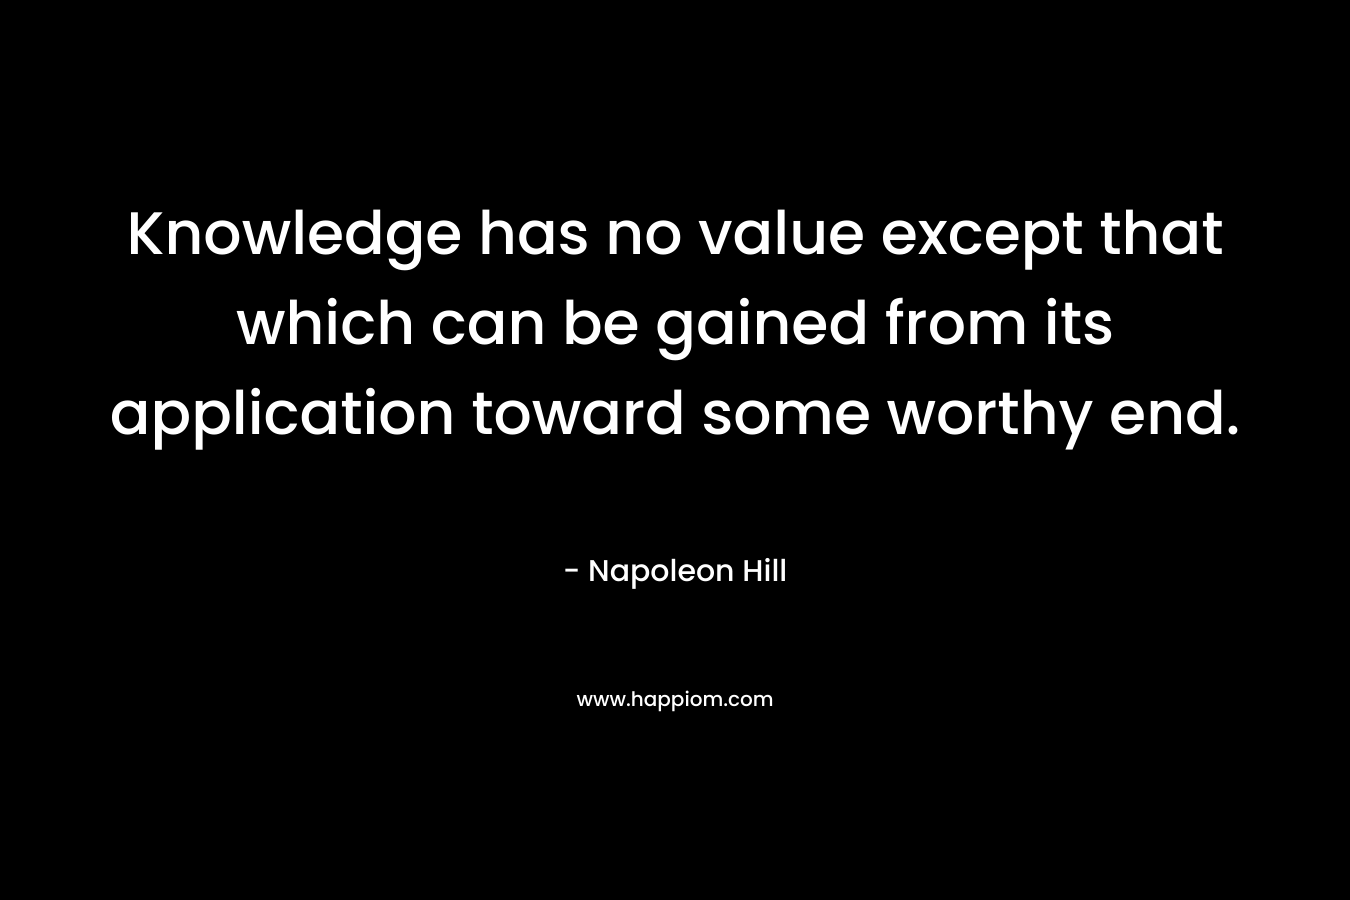 Knowledge has no value except that which can be gained from its application toward some worthy end.